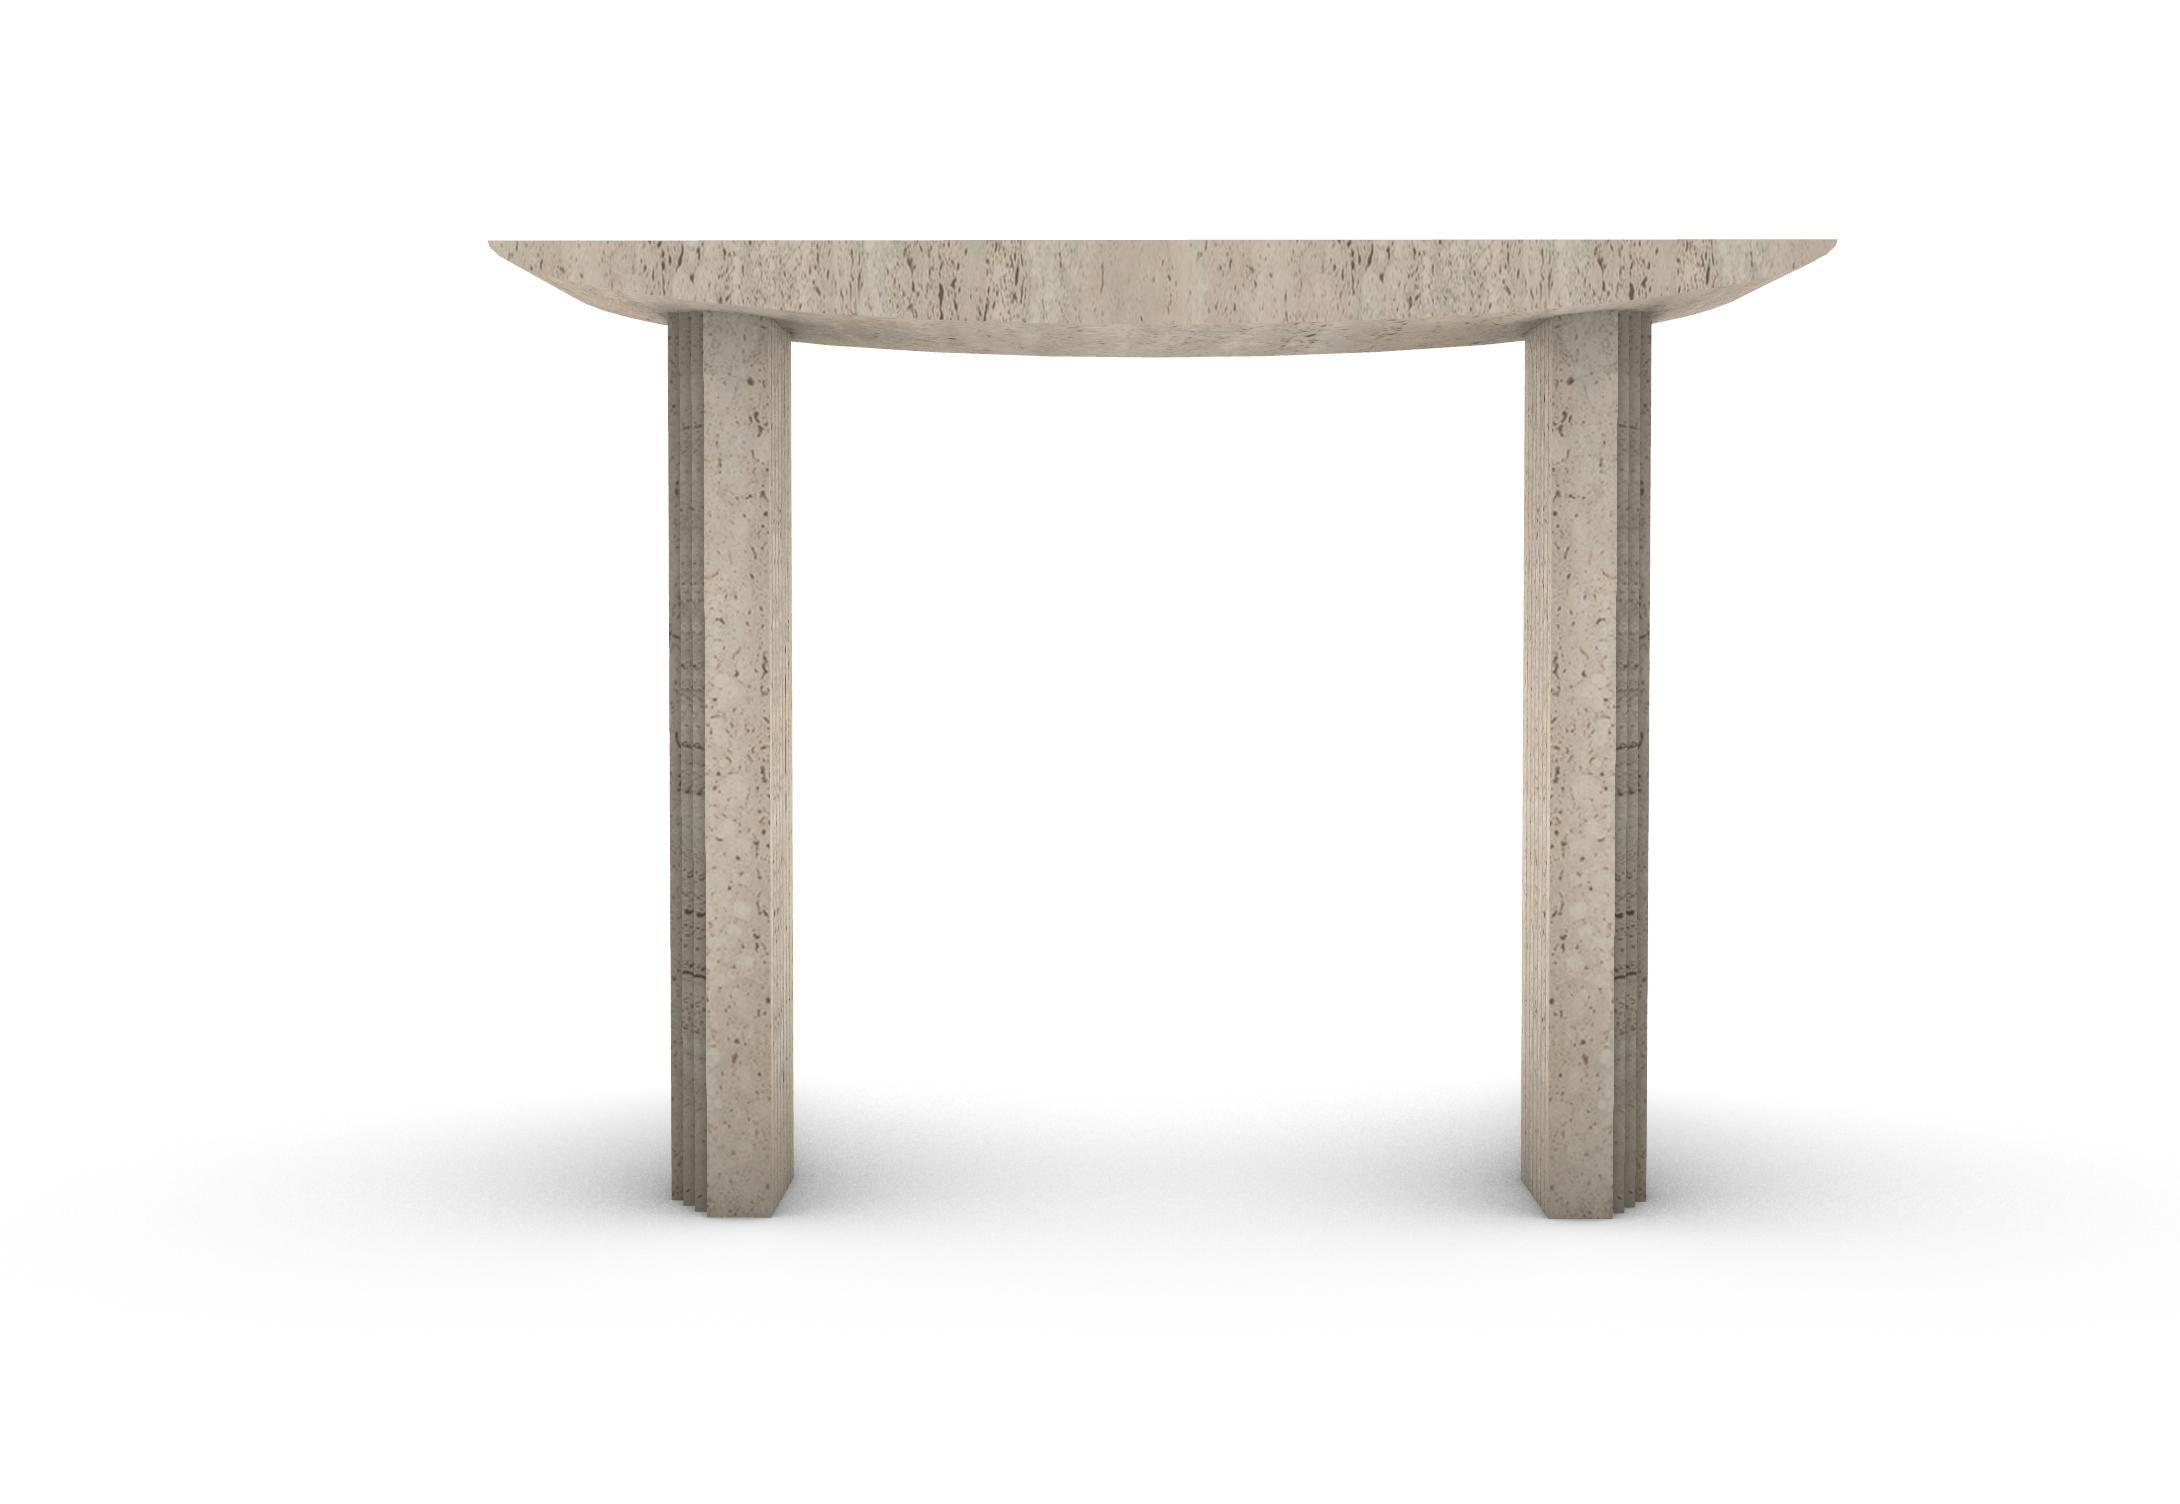 “Console 0024c” is a sculptural console table  in Travertine created by the artist Desia Ava. 
The piece features strong lines and gentle curves. Marked by architectural aesthetics, on the borderline between sculpture and furniture the Travertine